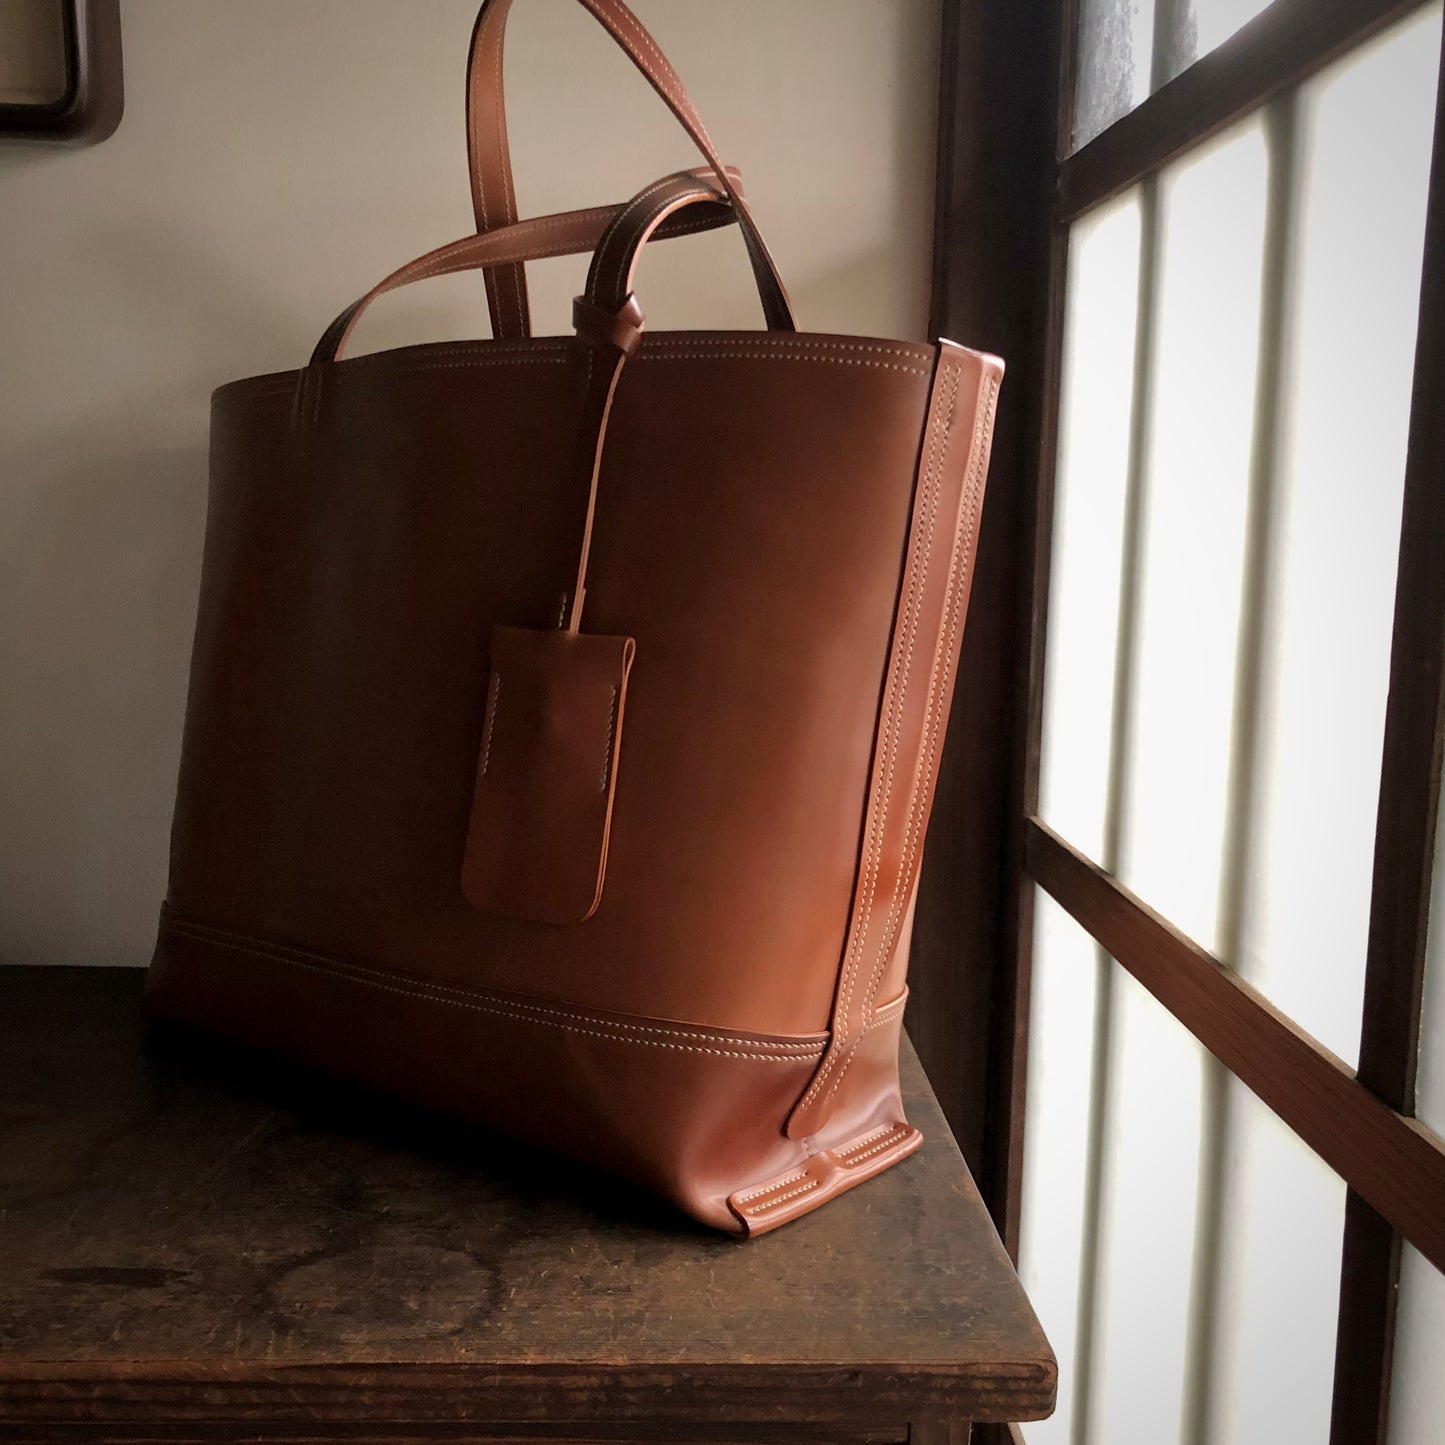 Shell Bag / Tote【Horween】シェルコードバンのトートバッグ